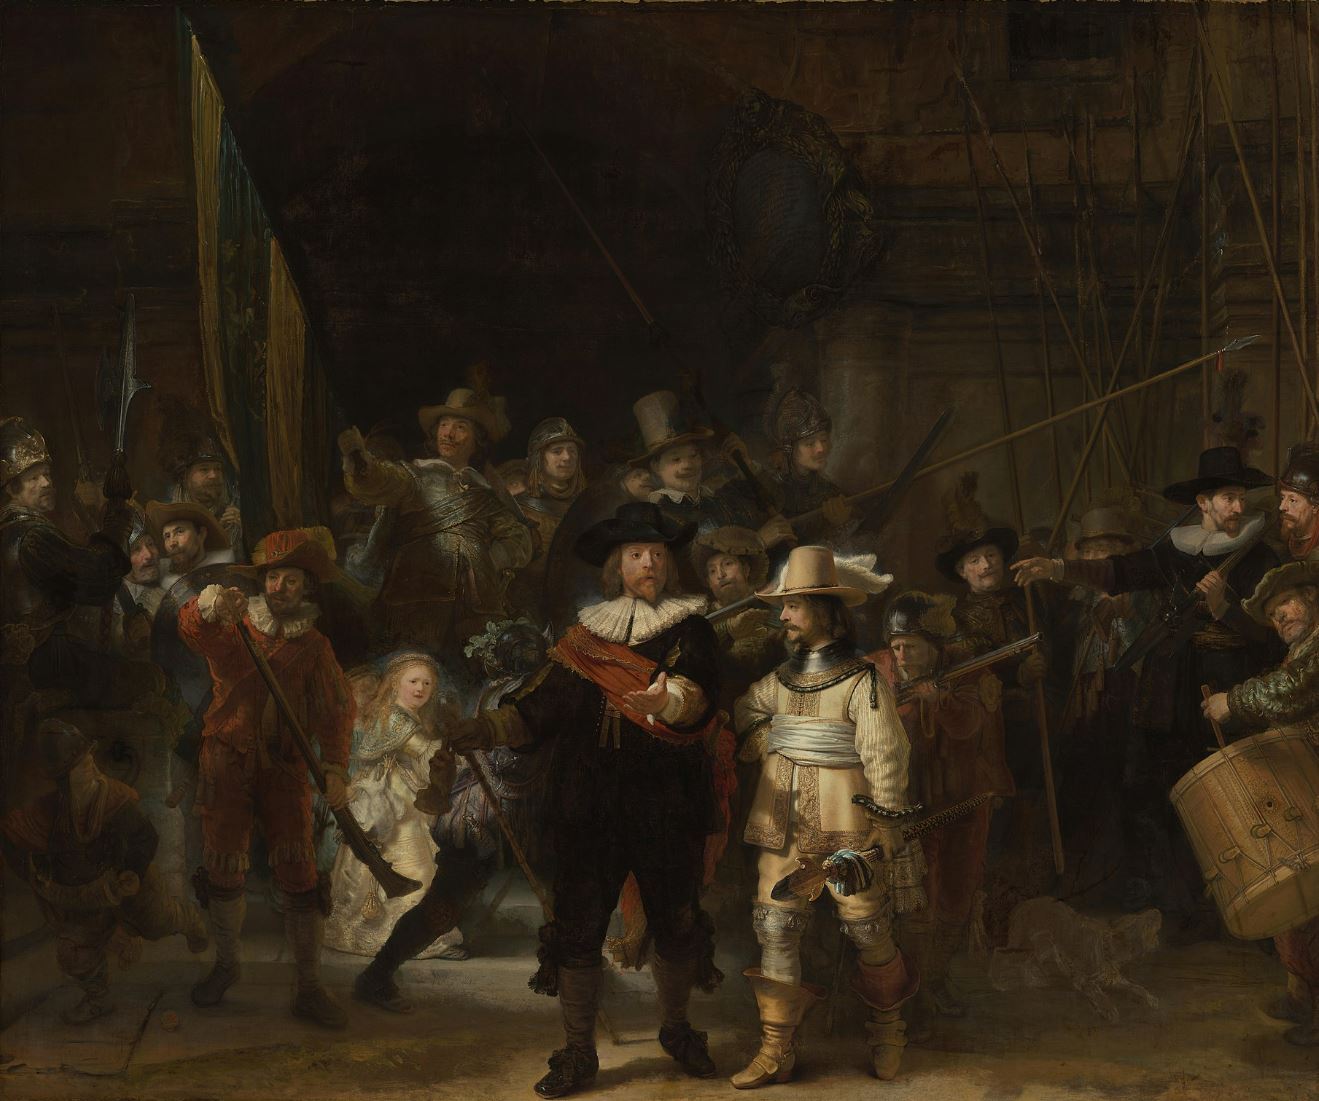 The Night Watch by Rembrandt